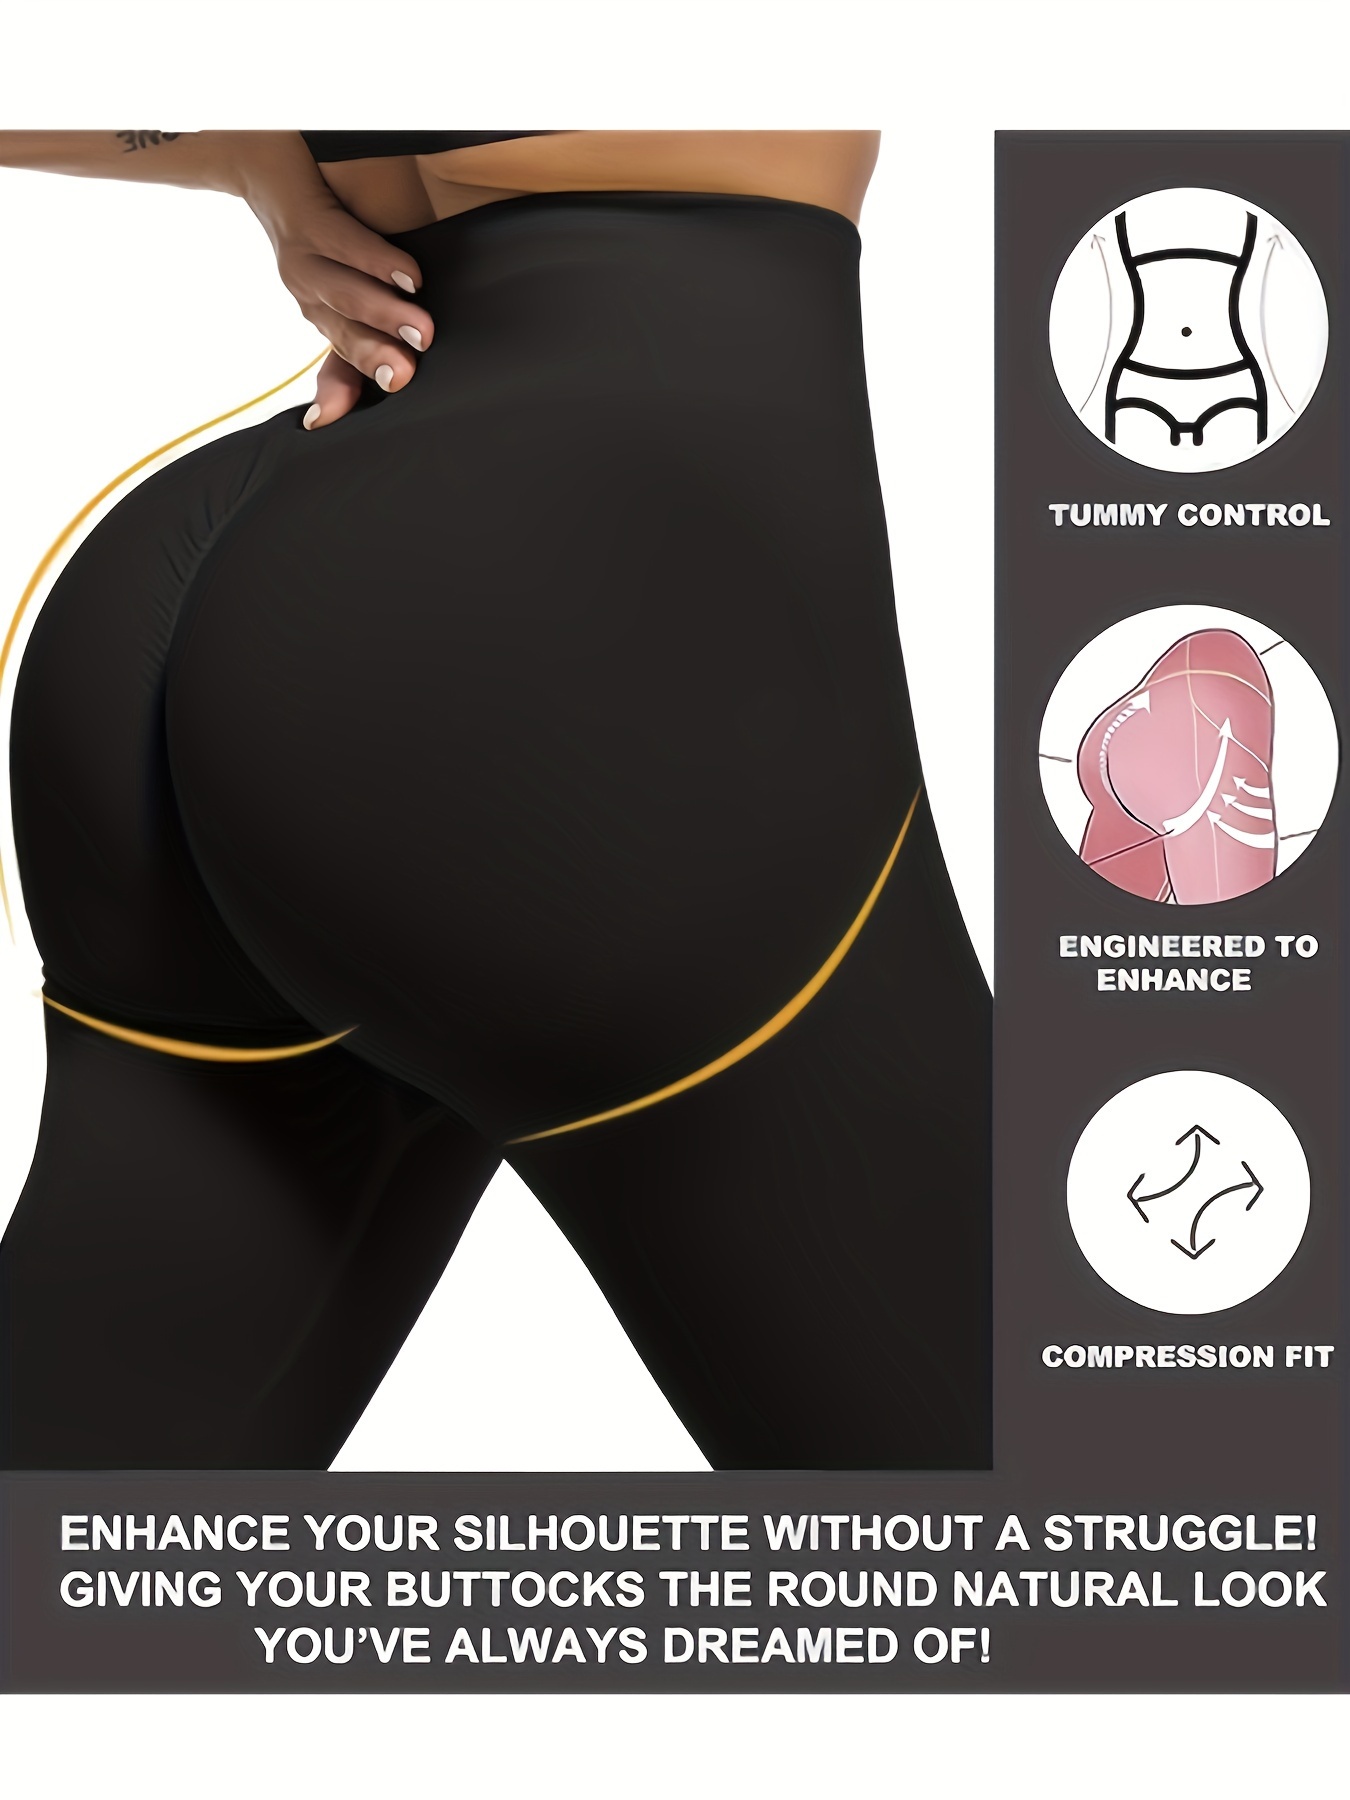 Ink Splatter Compression Leggings, Flattering Non-see-through and  Squat-proof Women's Sports Leggings With Butt-lifting Cut, Size XXS to 3XL  